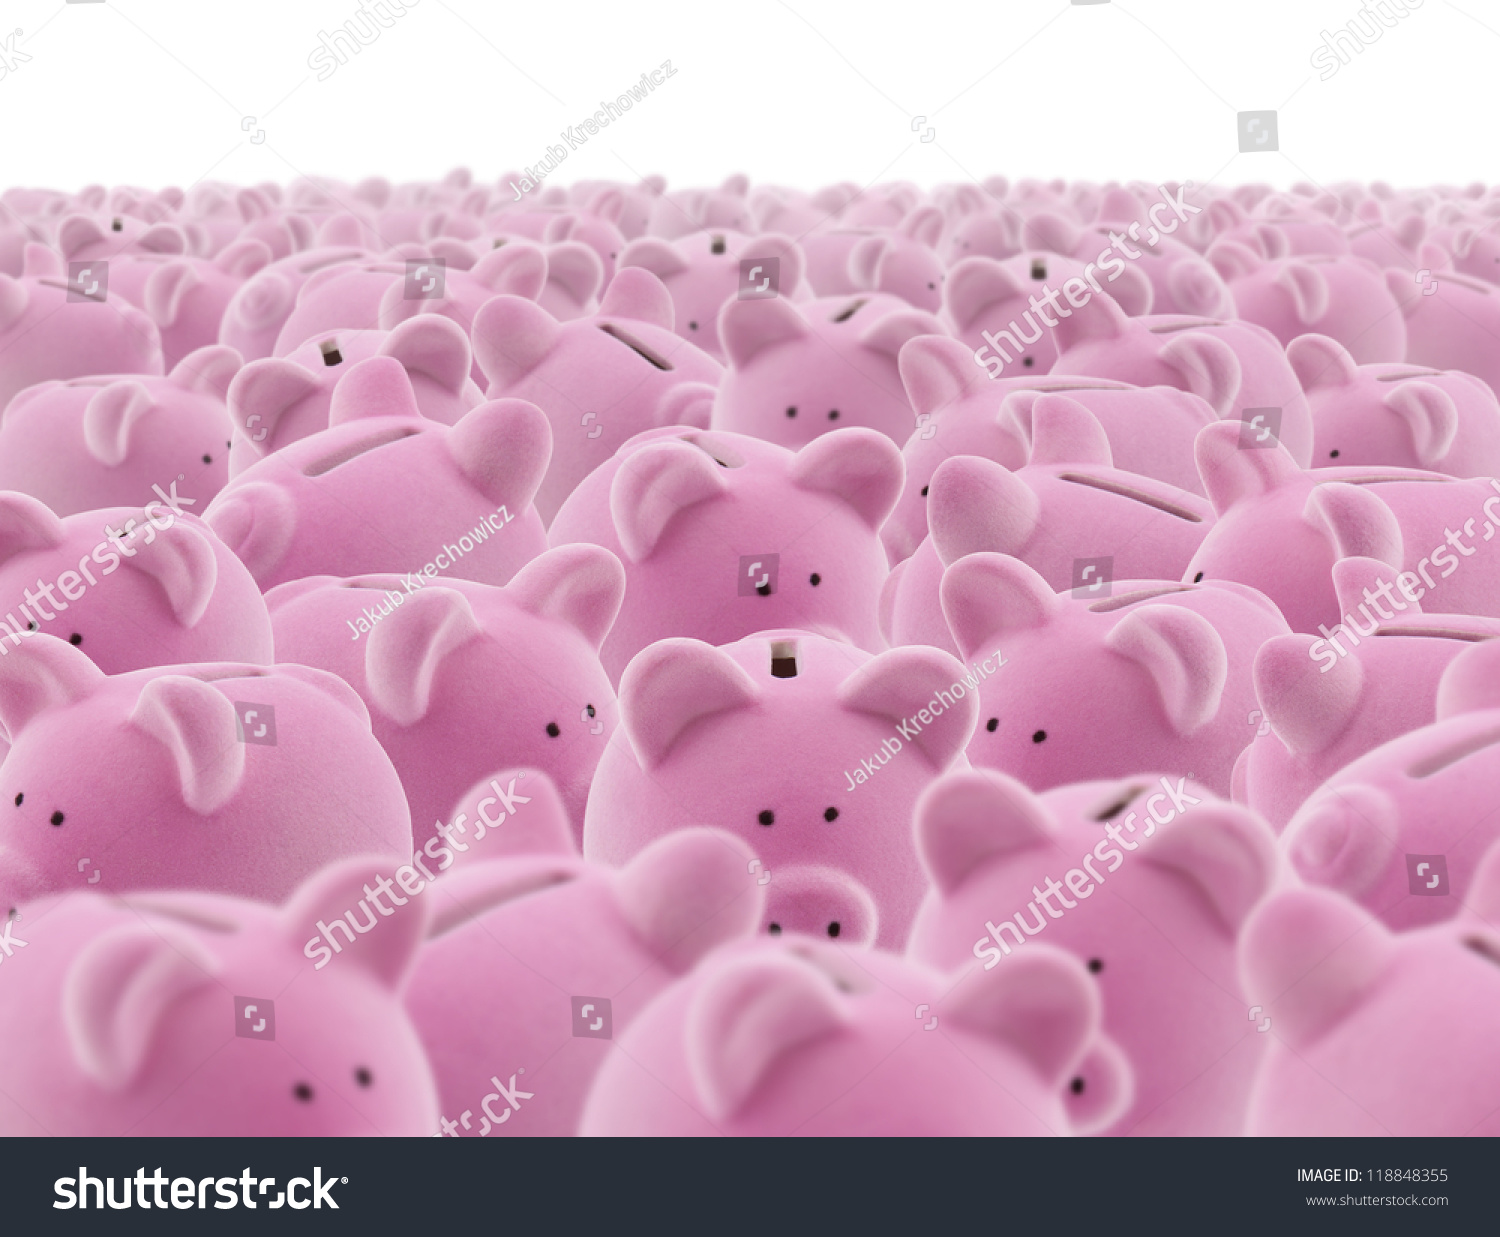 Large group of pink piggy banks #118848355